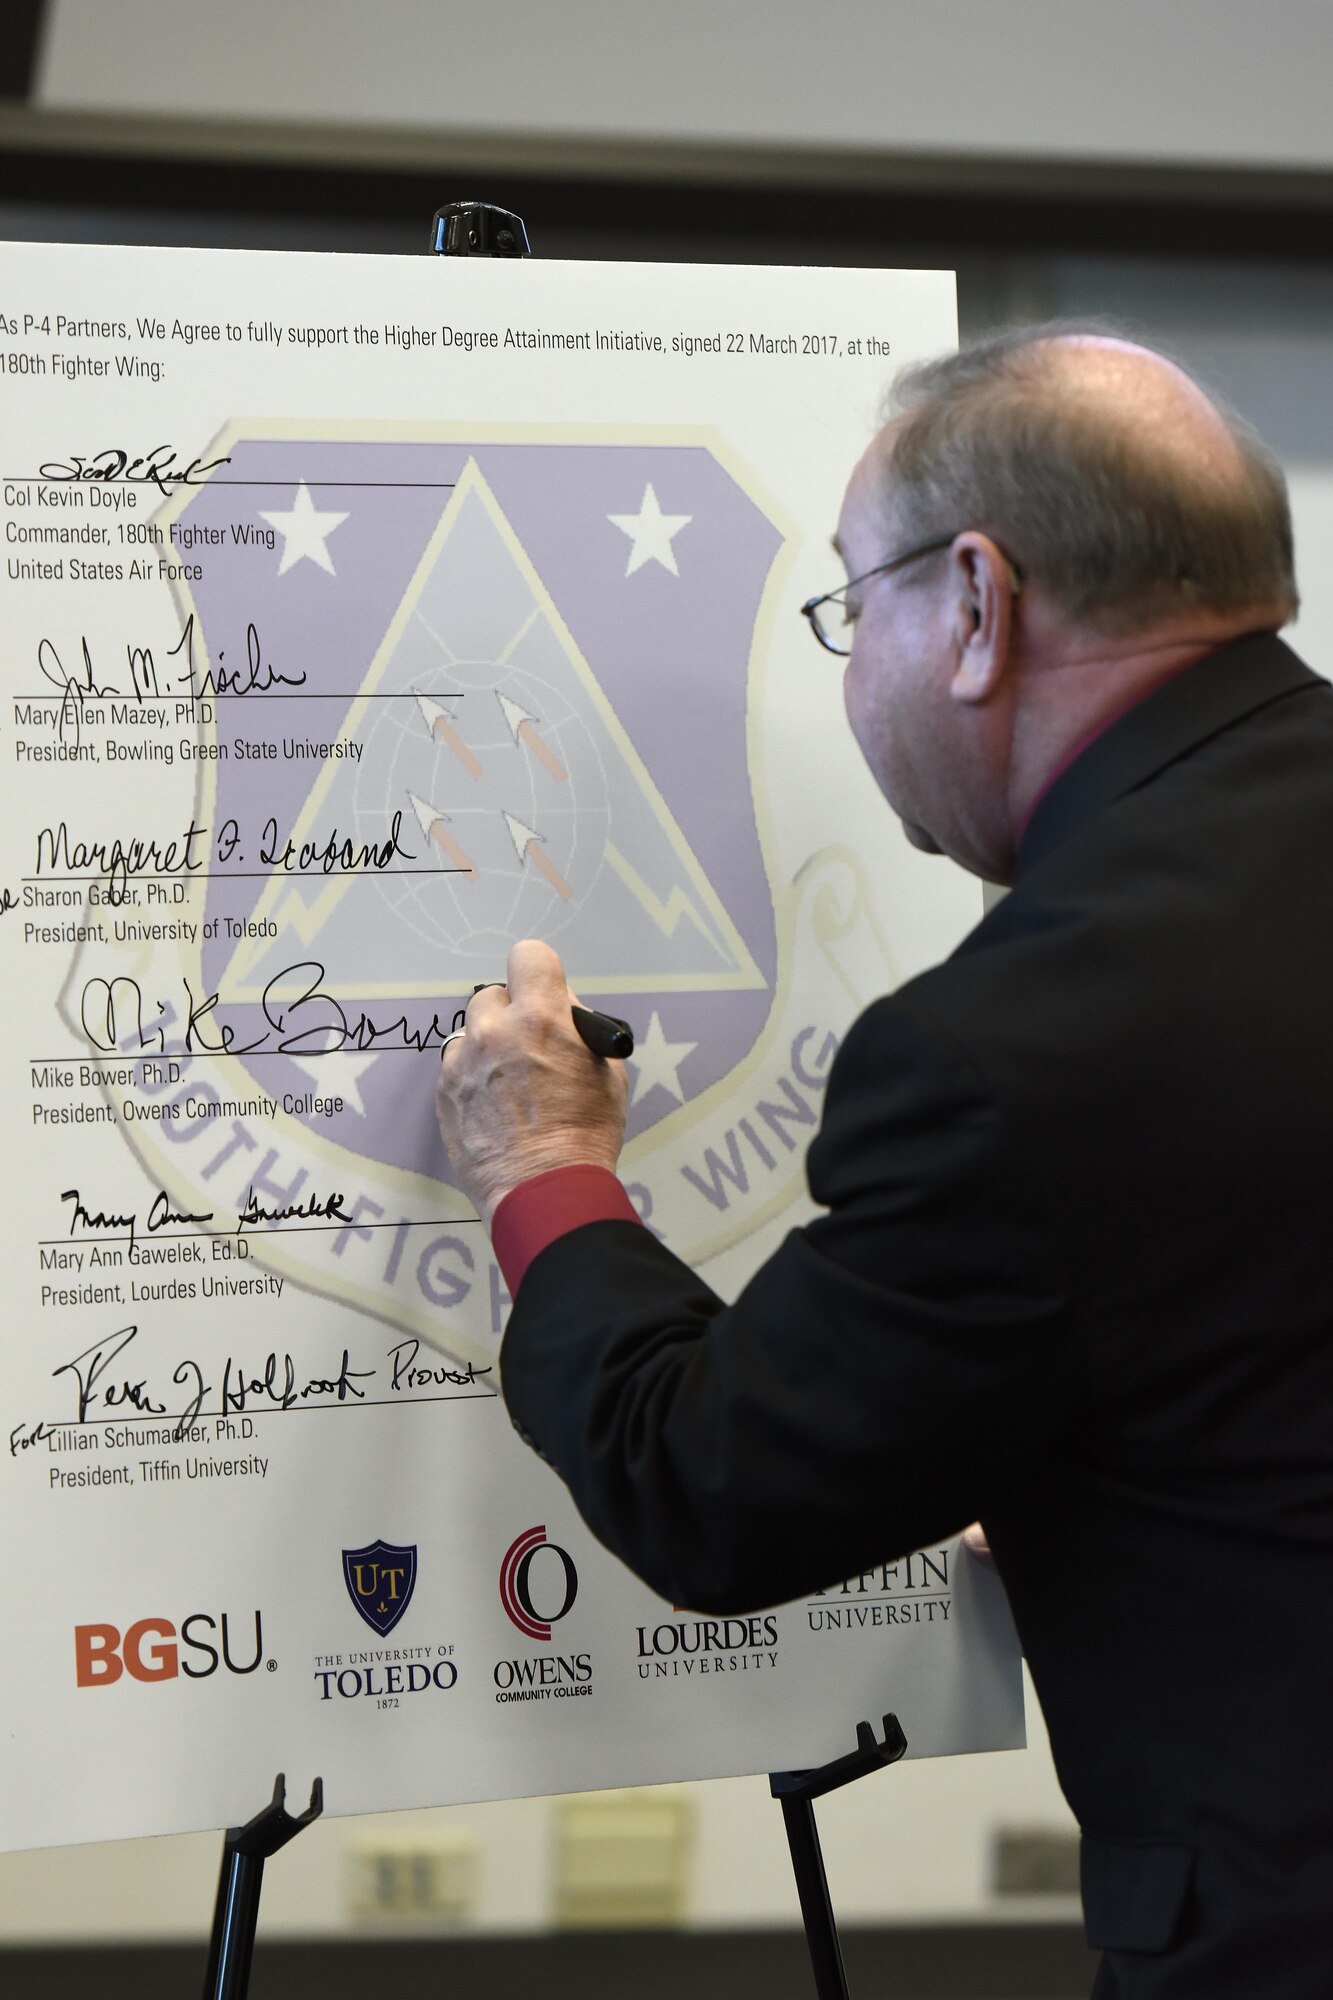 Mike Bower, president of Owens Community College, signs the Higher Degree Attainment Initiative March 22,2017 at the 180th Fighter Wing in Swanton, Ohio. The agreement between the 180FW and five local-area universities provides additional education opportunities for 180FW Airmen while providing participating colleges with recruitment opportunities. (U.S. Air National Guard photo by Staff Sgt. Shane Hughes)